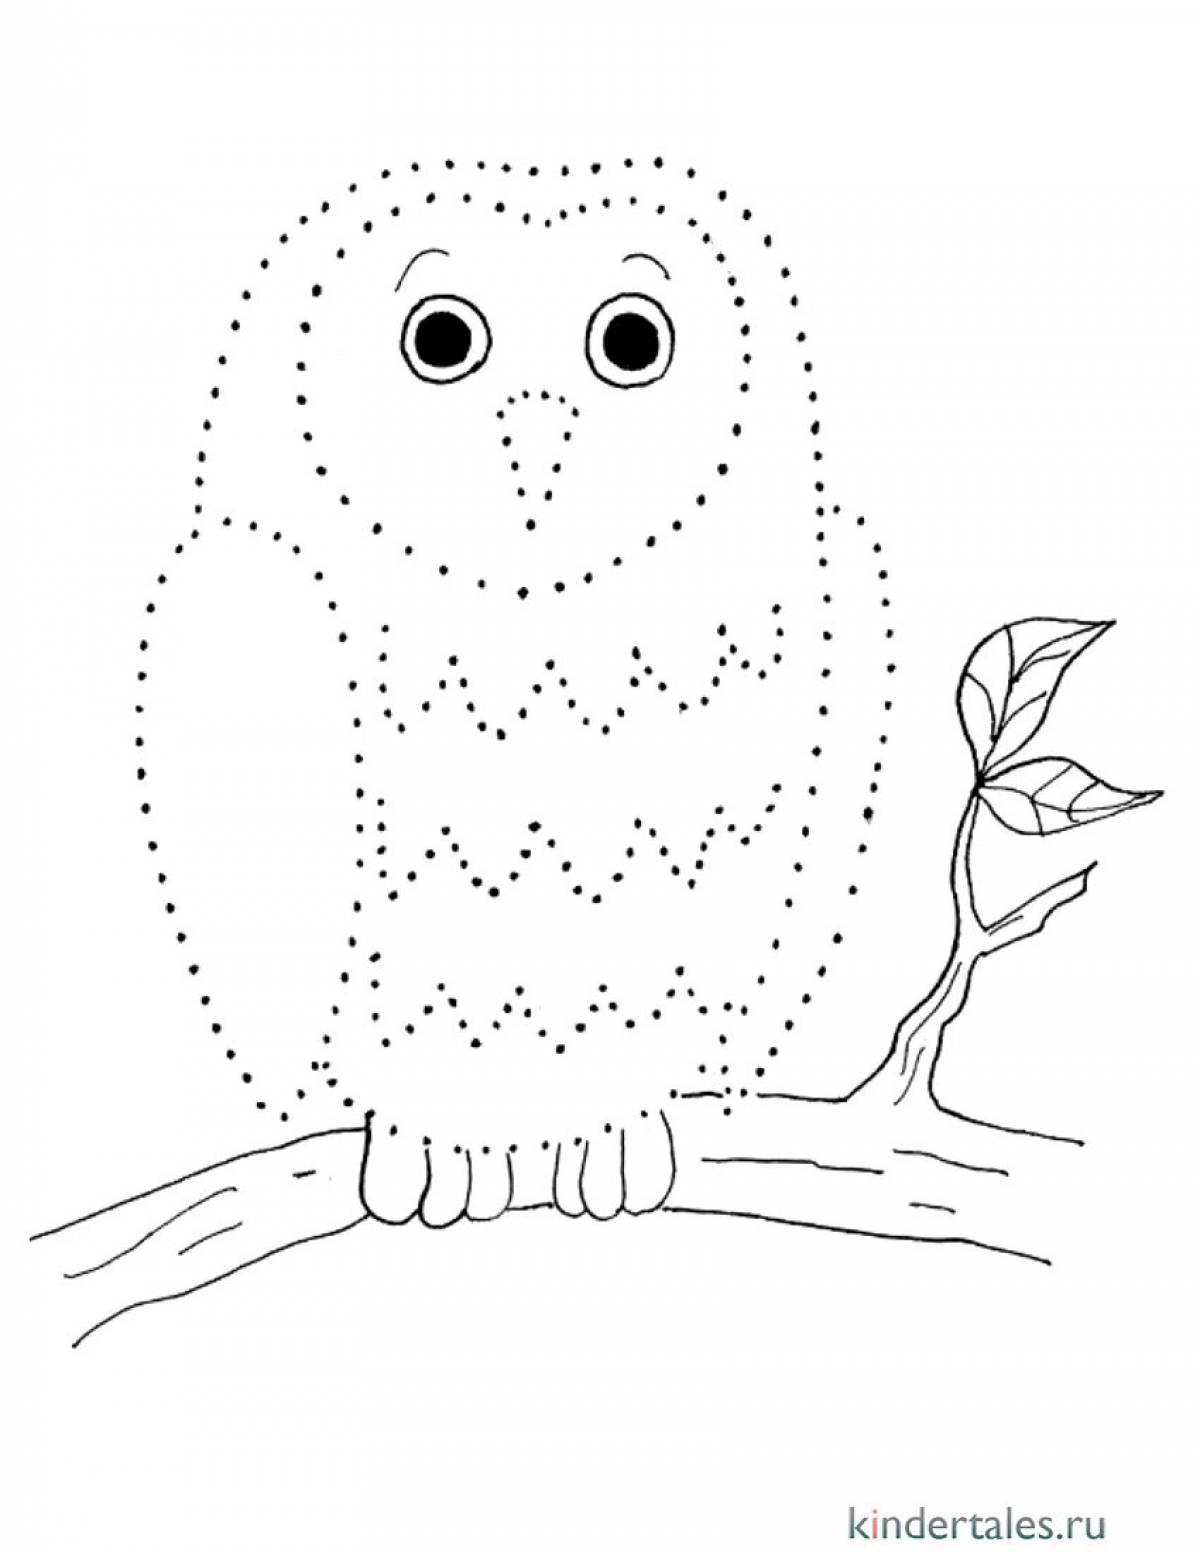 Colorful dotty dream coloring page for kids